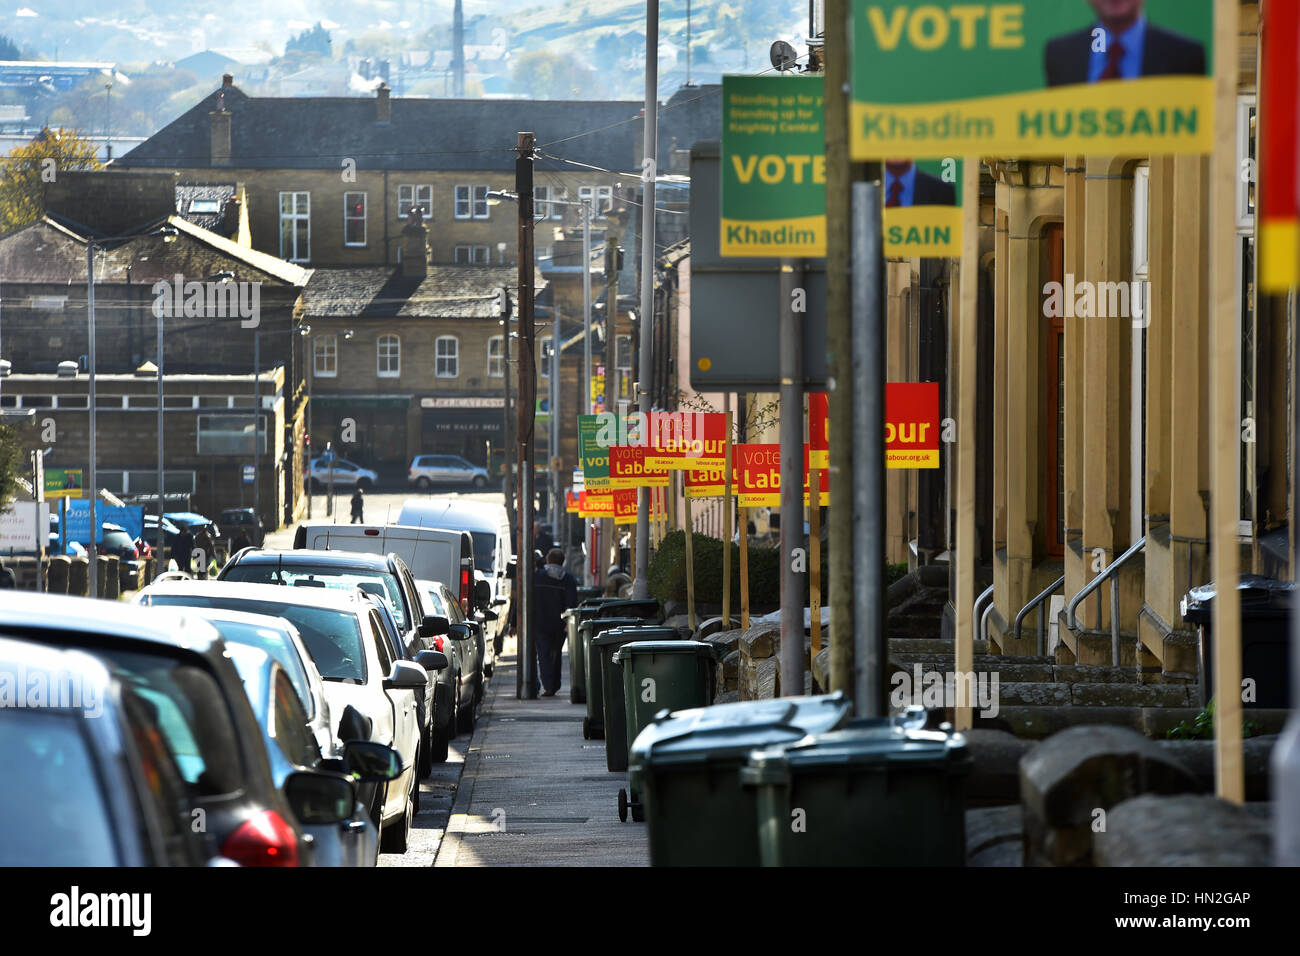 Election signs on a Keighley Street, West Yorkshire UK Stock Photo